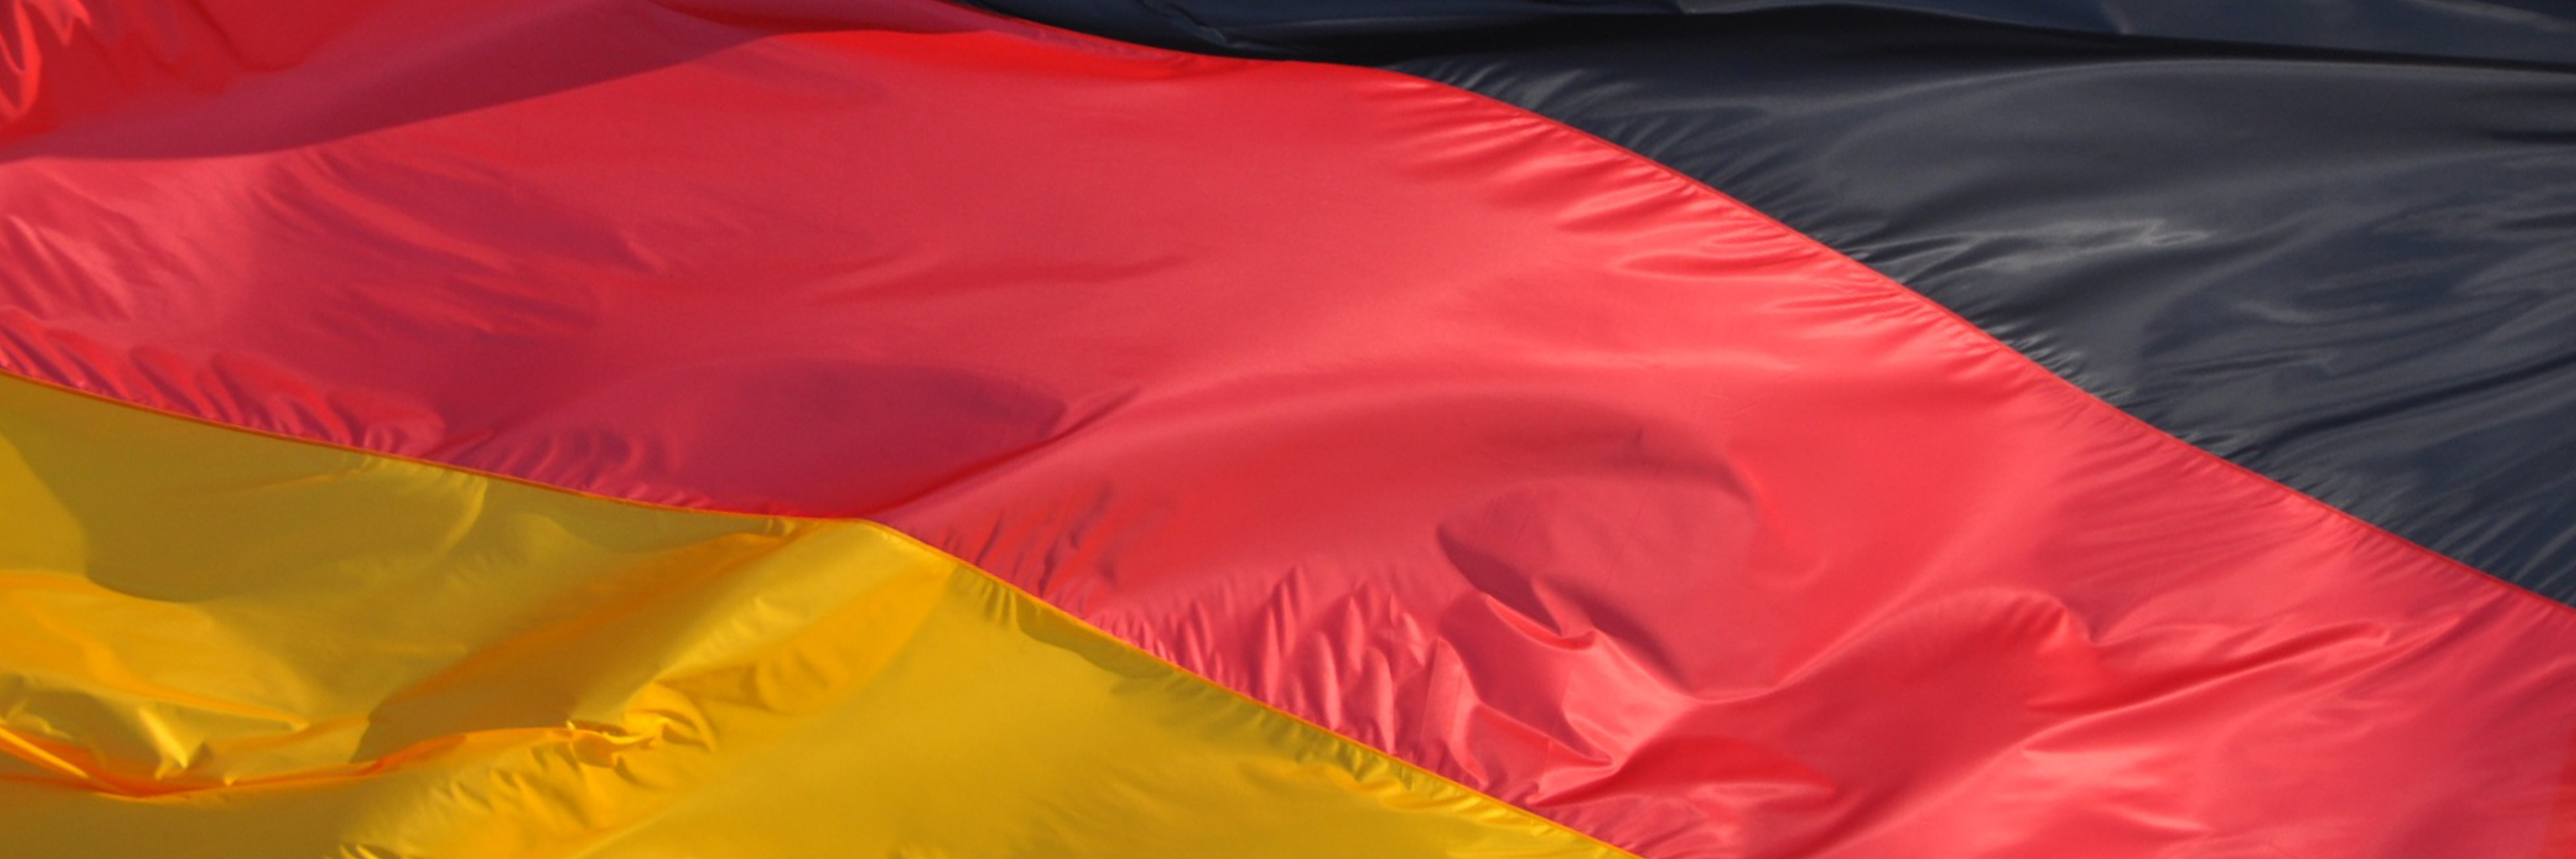 Close-up image of black, red, and yellow German flag.